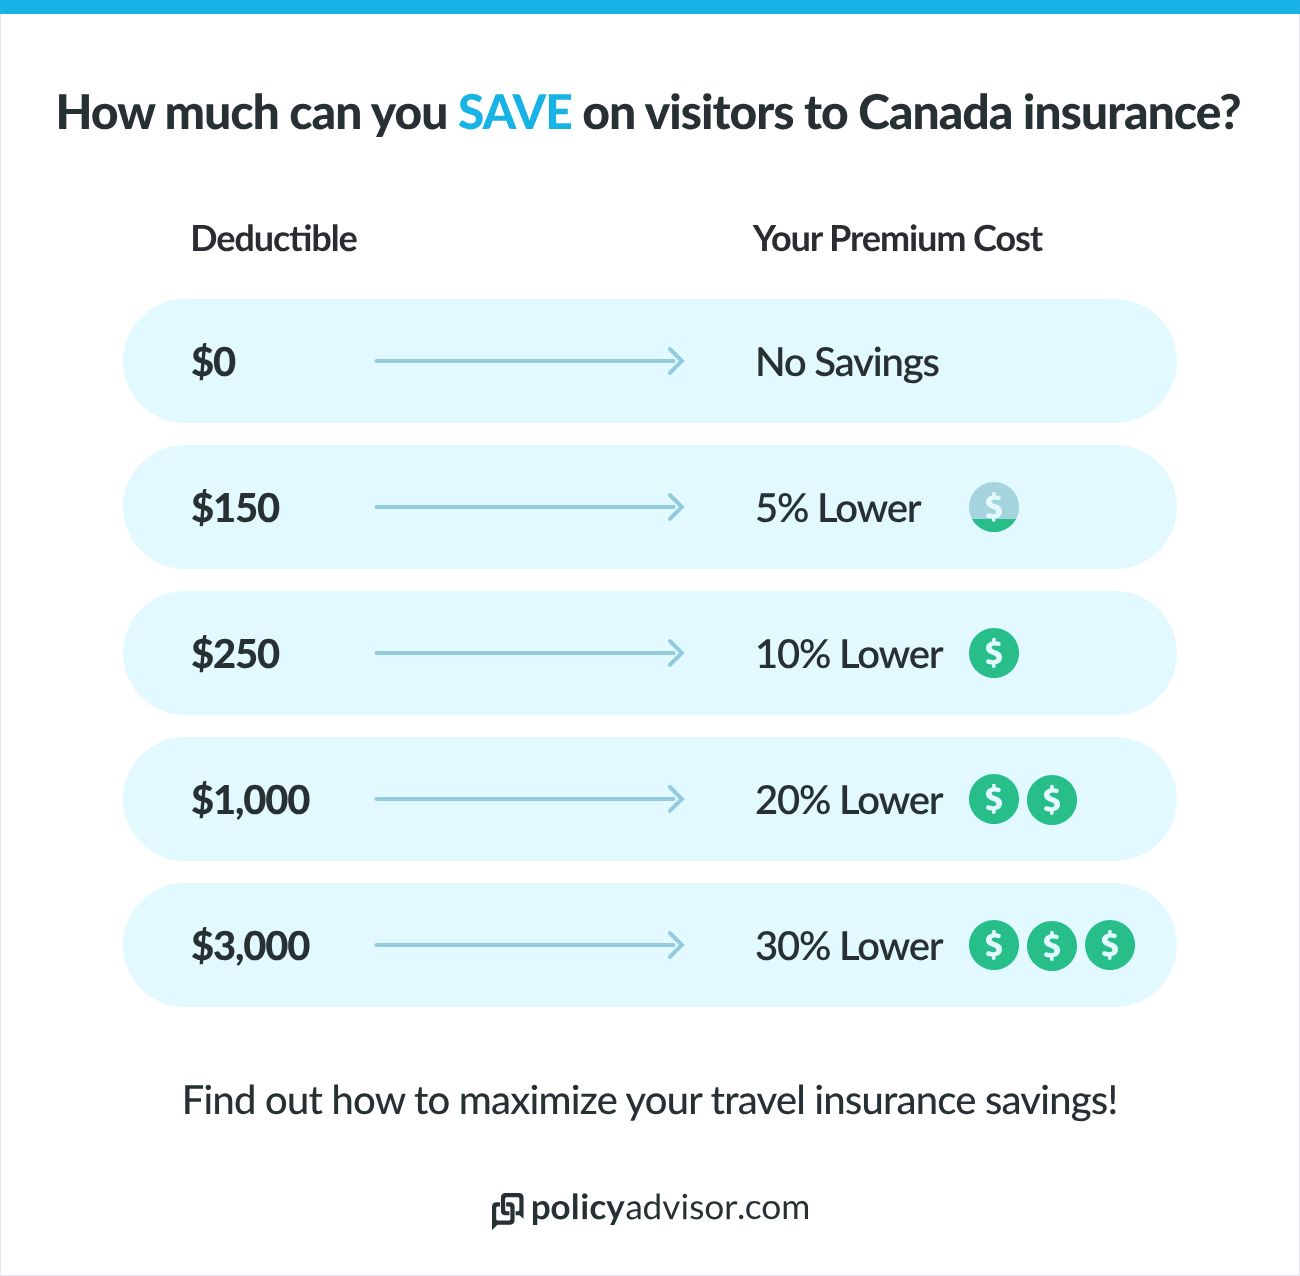 Premiums for Canadian visitors insurance are lower if you choose a higher deductible.